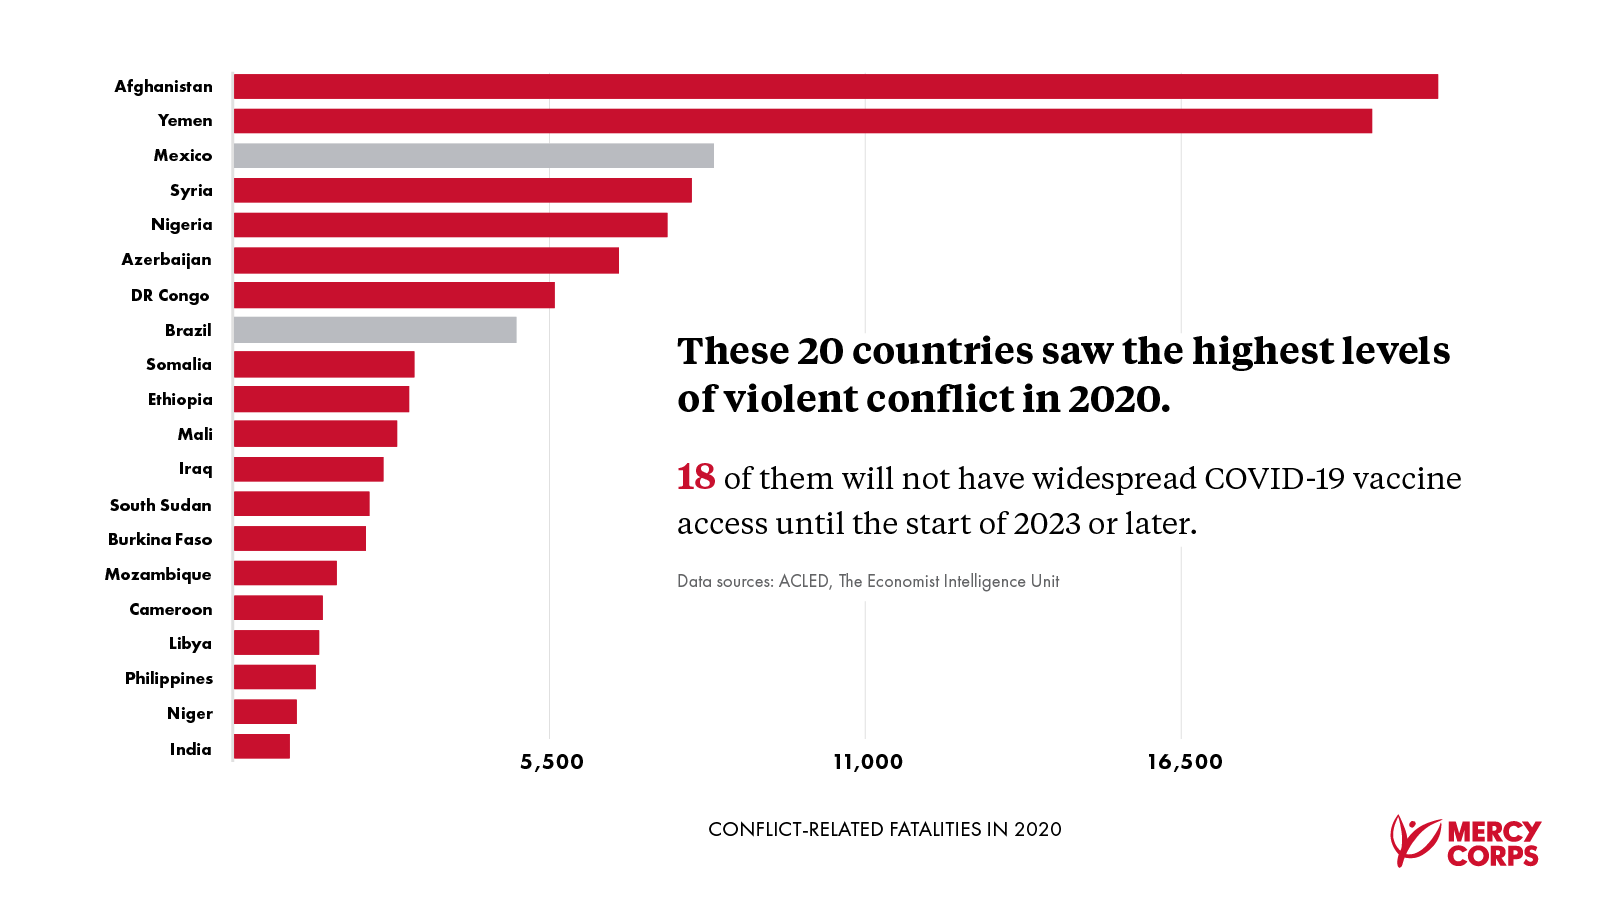 Of the 20 countries that saw the highest levels of conflict in 2020, 18 will not receive widespread vaccine access before the start of 2023 or later.